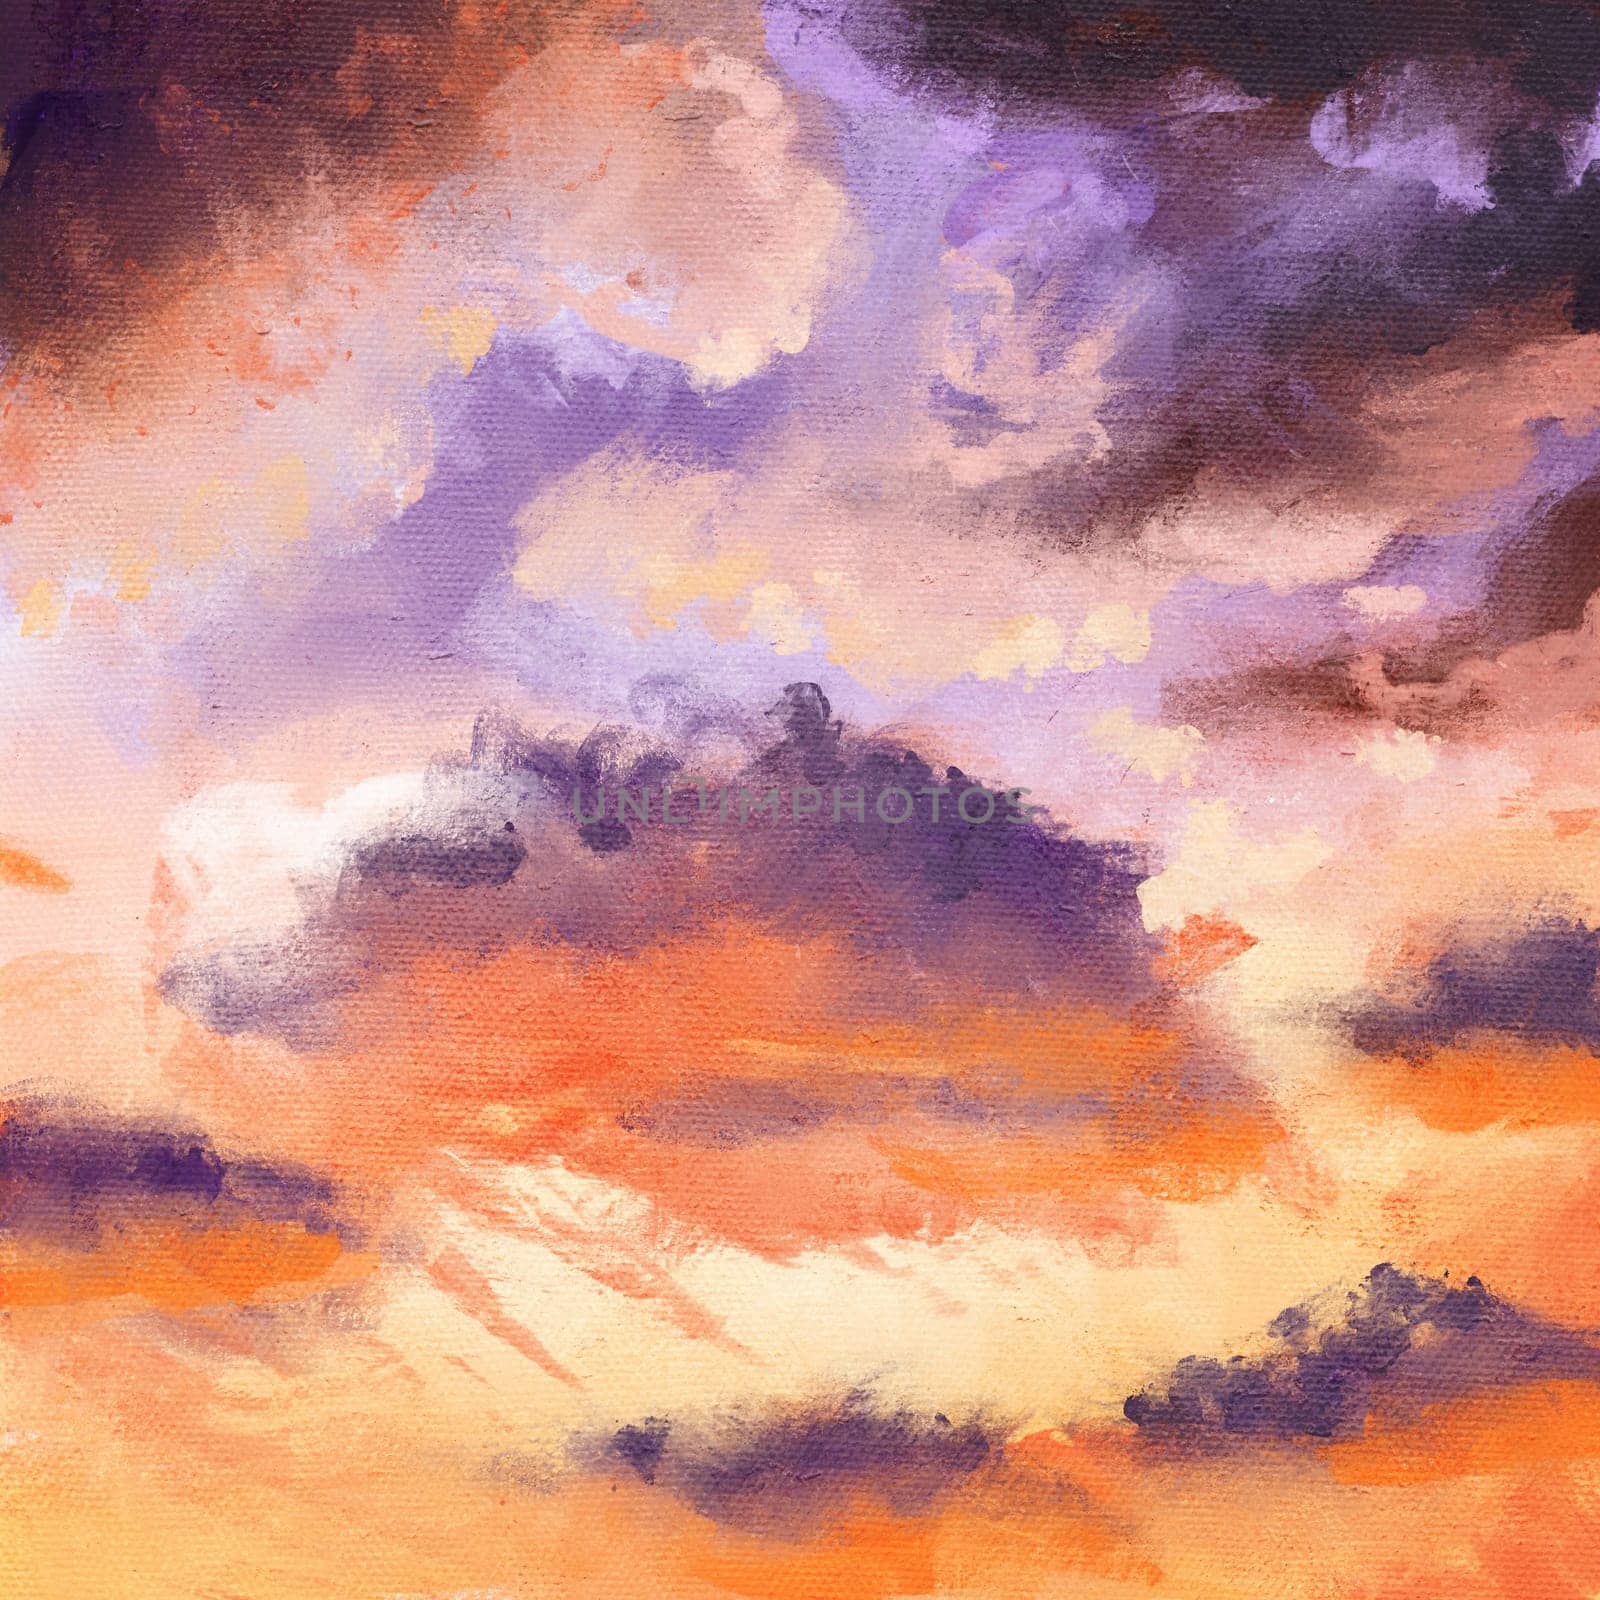 Hand drawn illustration of evening sky sunset, sea ocean water surface orange colors, shiny shimmer reflection, sunrise cold purple lilac clouds, clear summer travel, oil paint texture sketch painting. by Lagmar